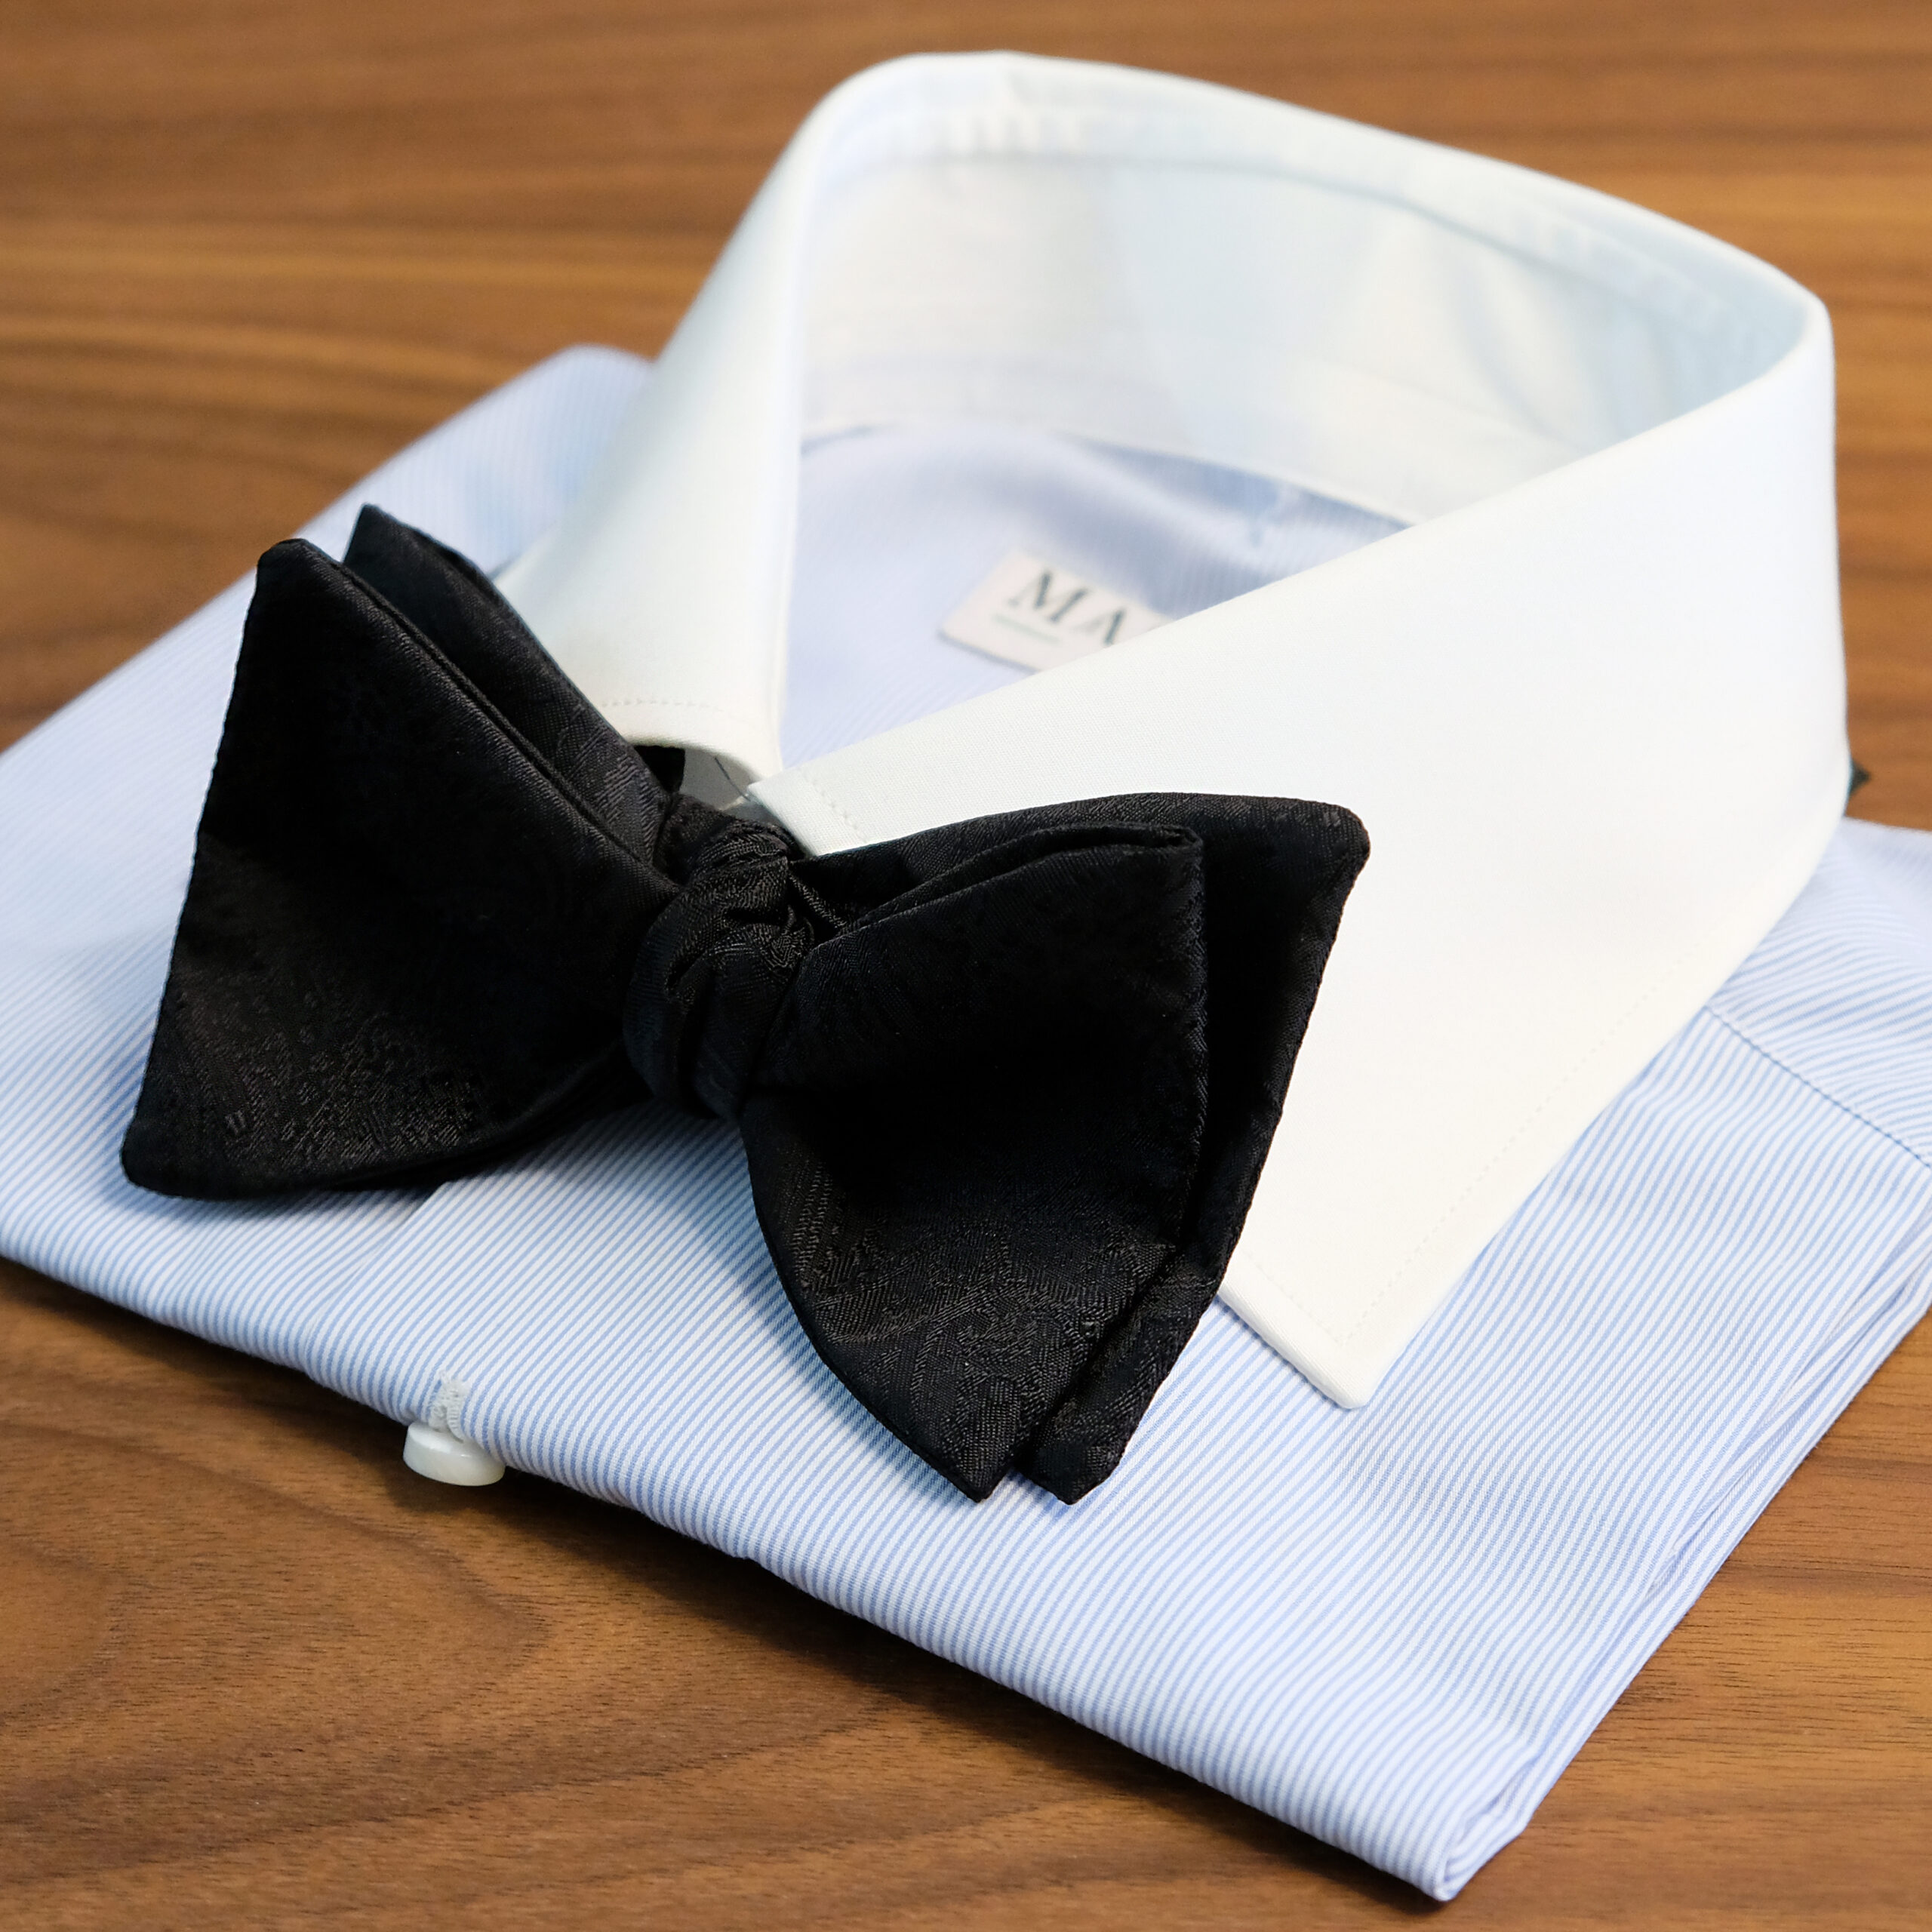 A black bow tie on top of a white shirt.